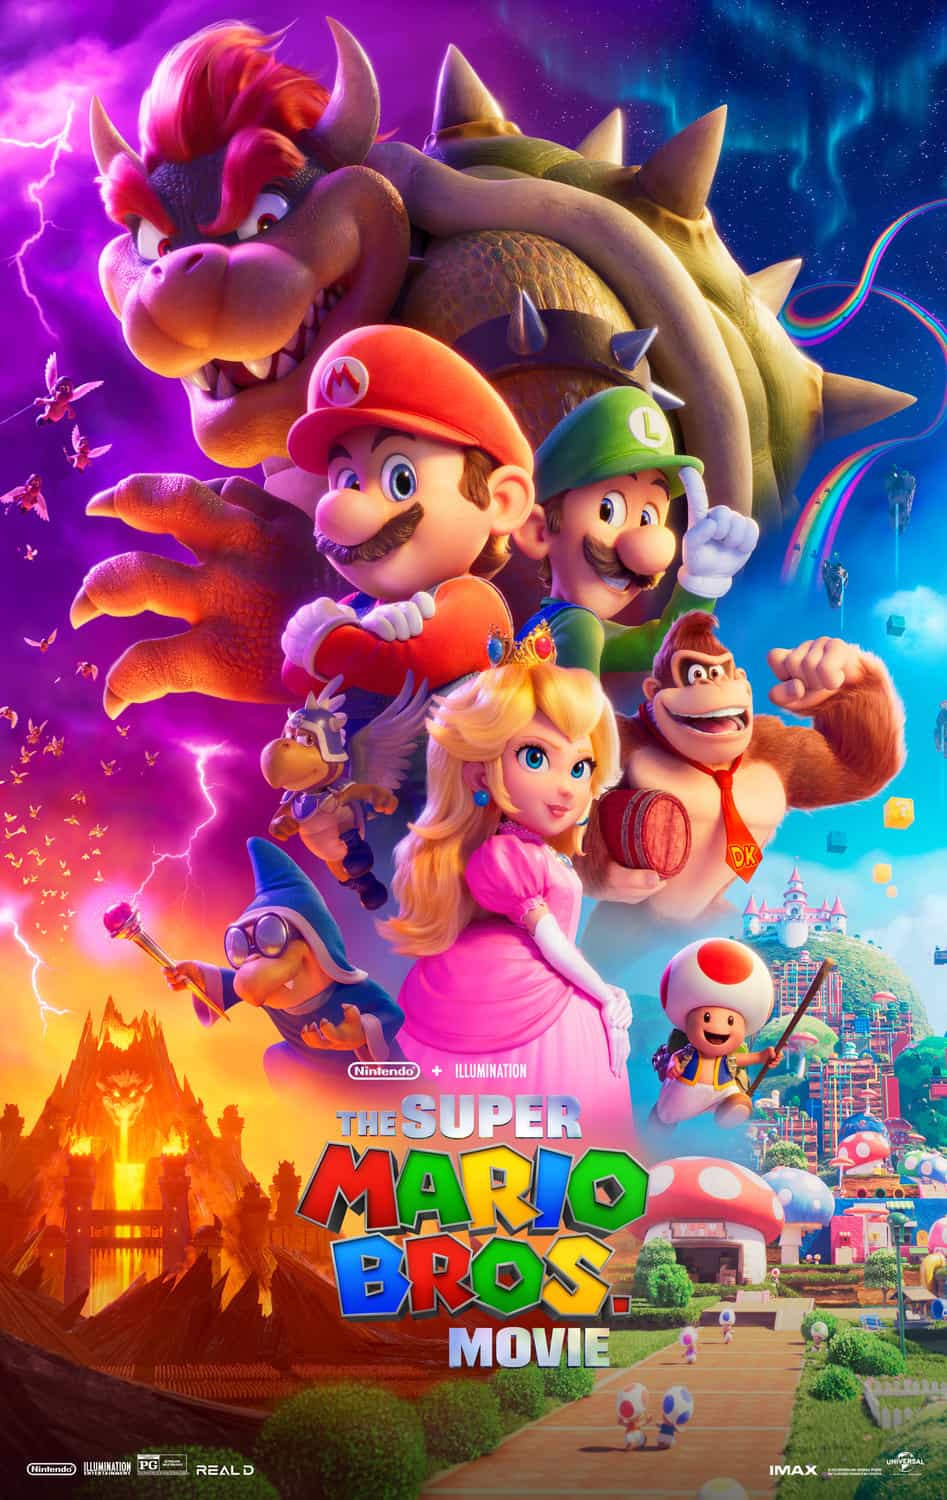 The Super Mario Bros. Movie is given a PG age rating in the UK for mild violence, threat